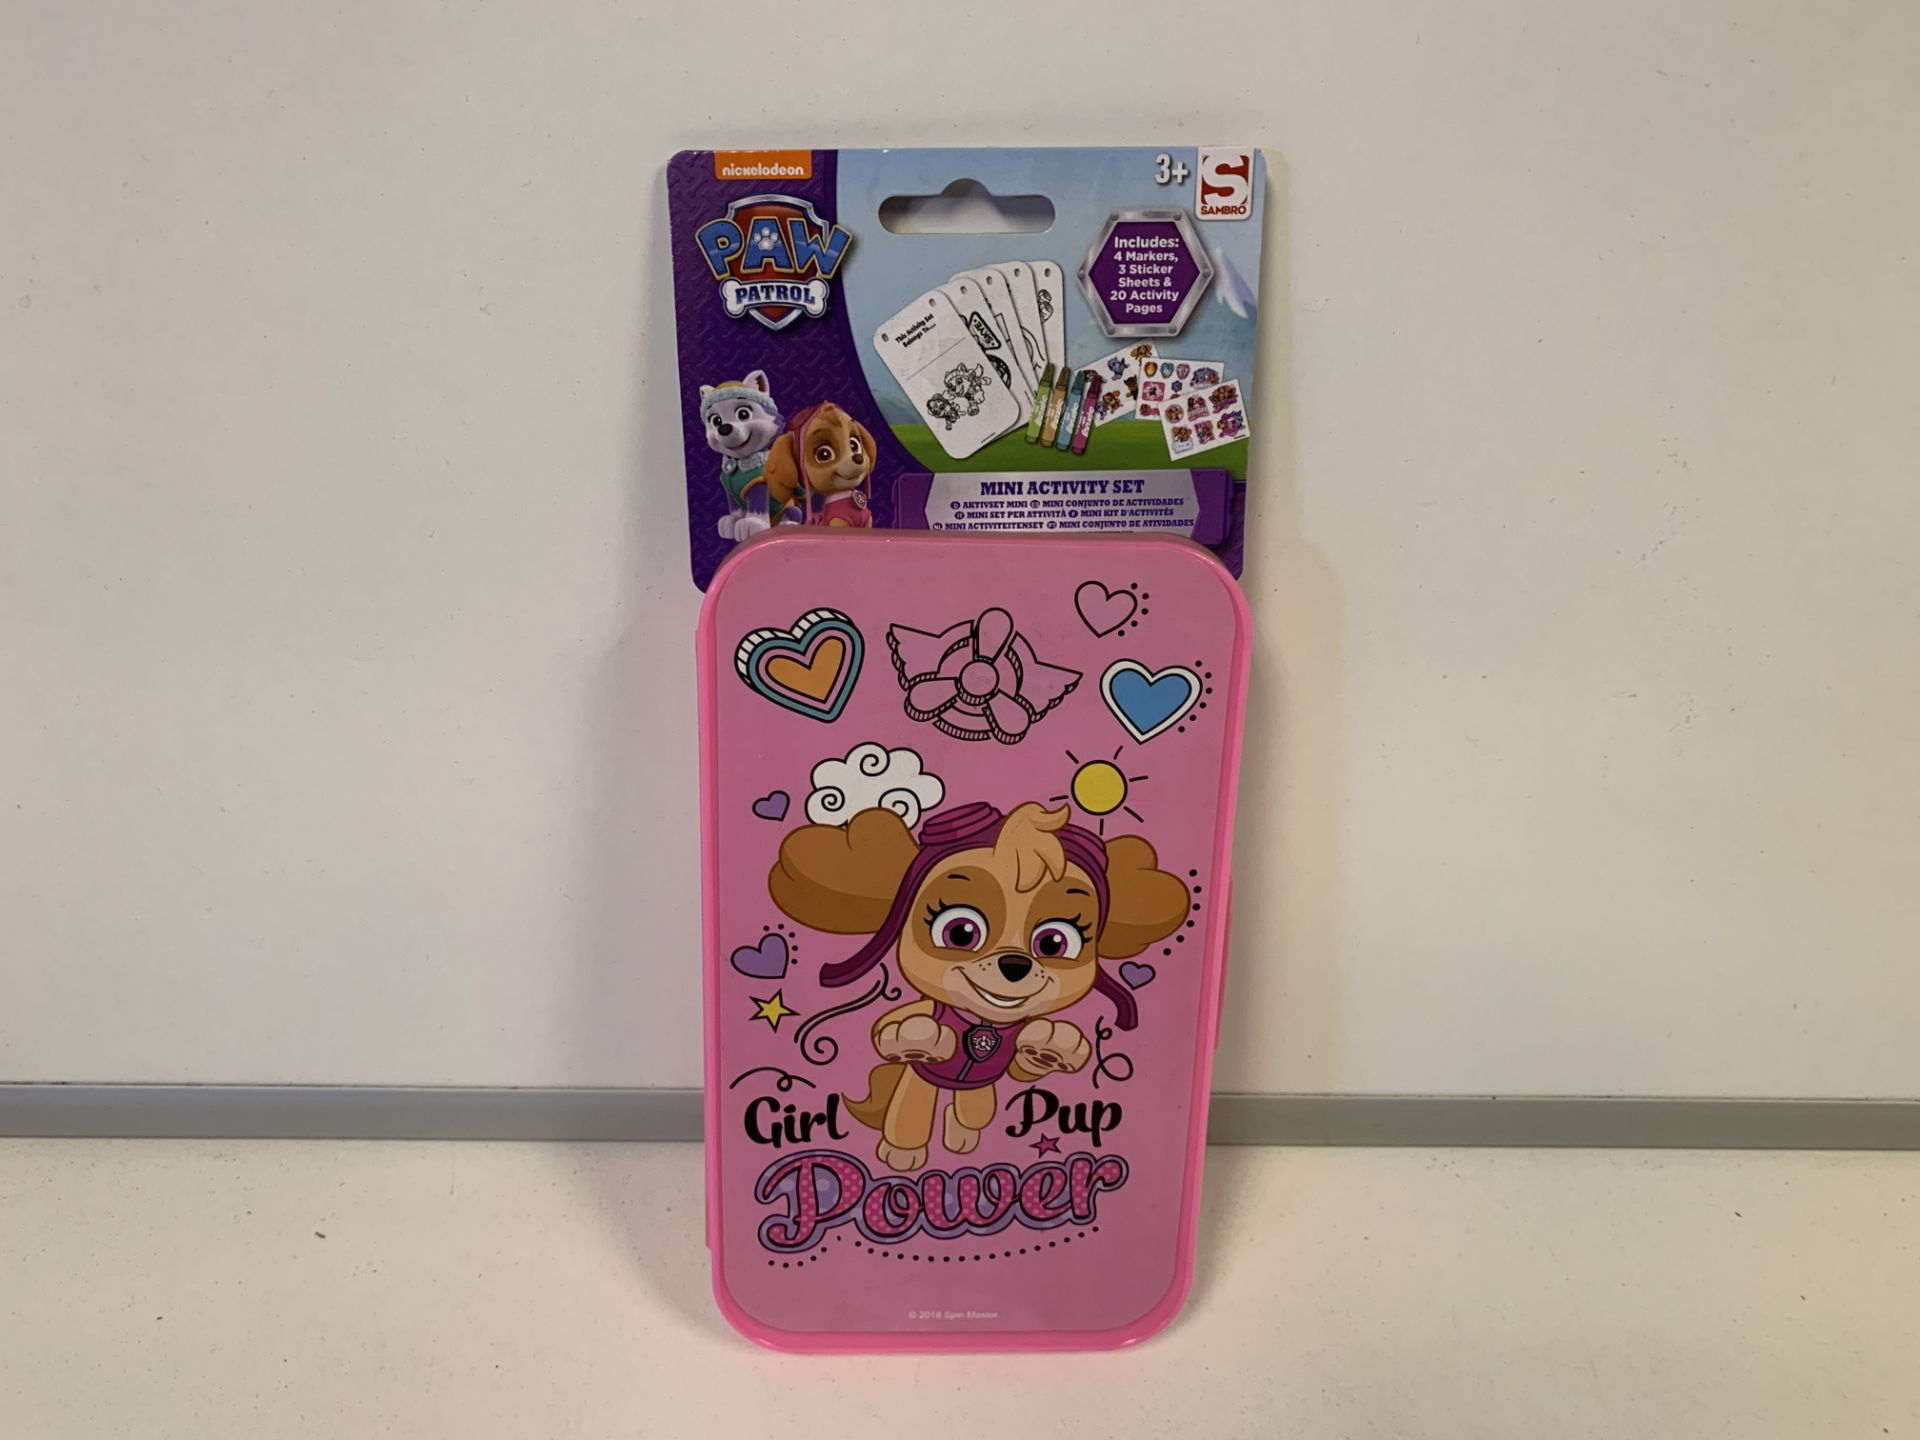 48 x NEW PACKAGED PAW PATROL MINI ACTIVITY SETS (1189/16)